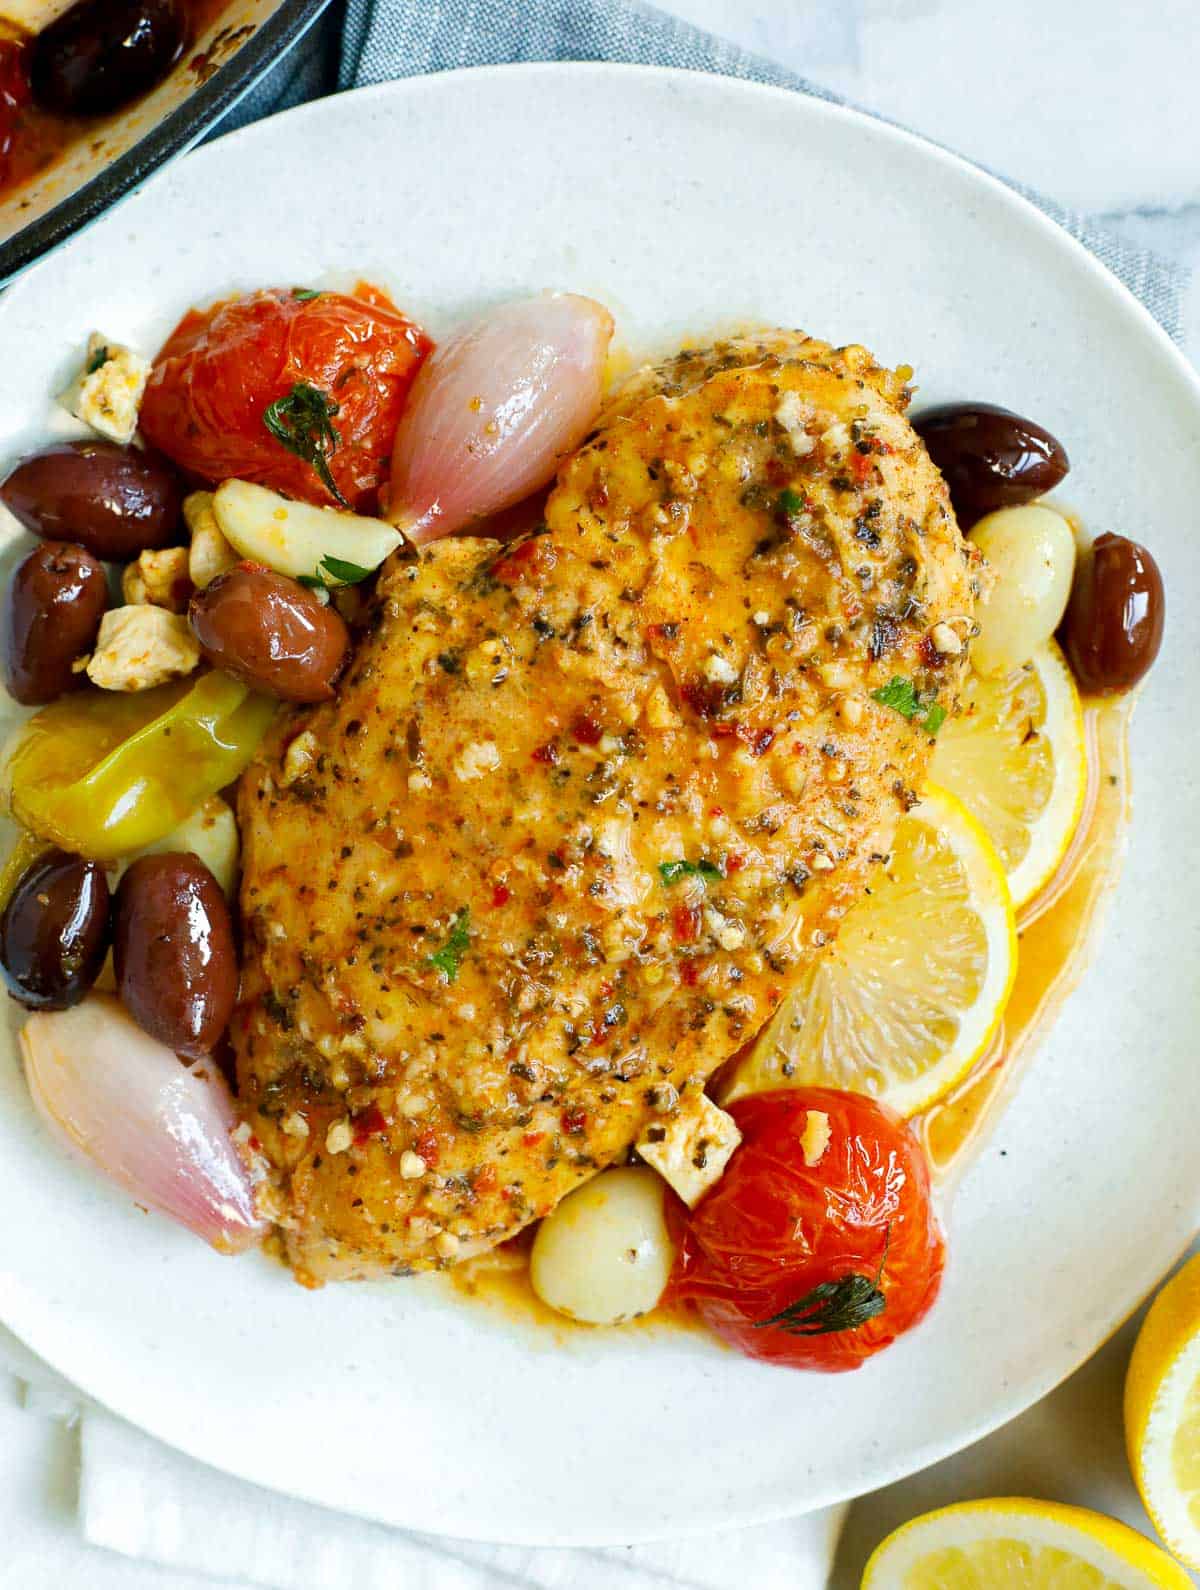 A plate with a chicken breast, olives, shallots, lemon slices, and tomatoes.